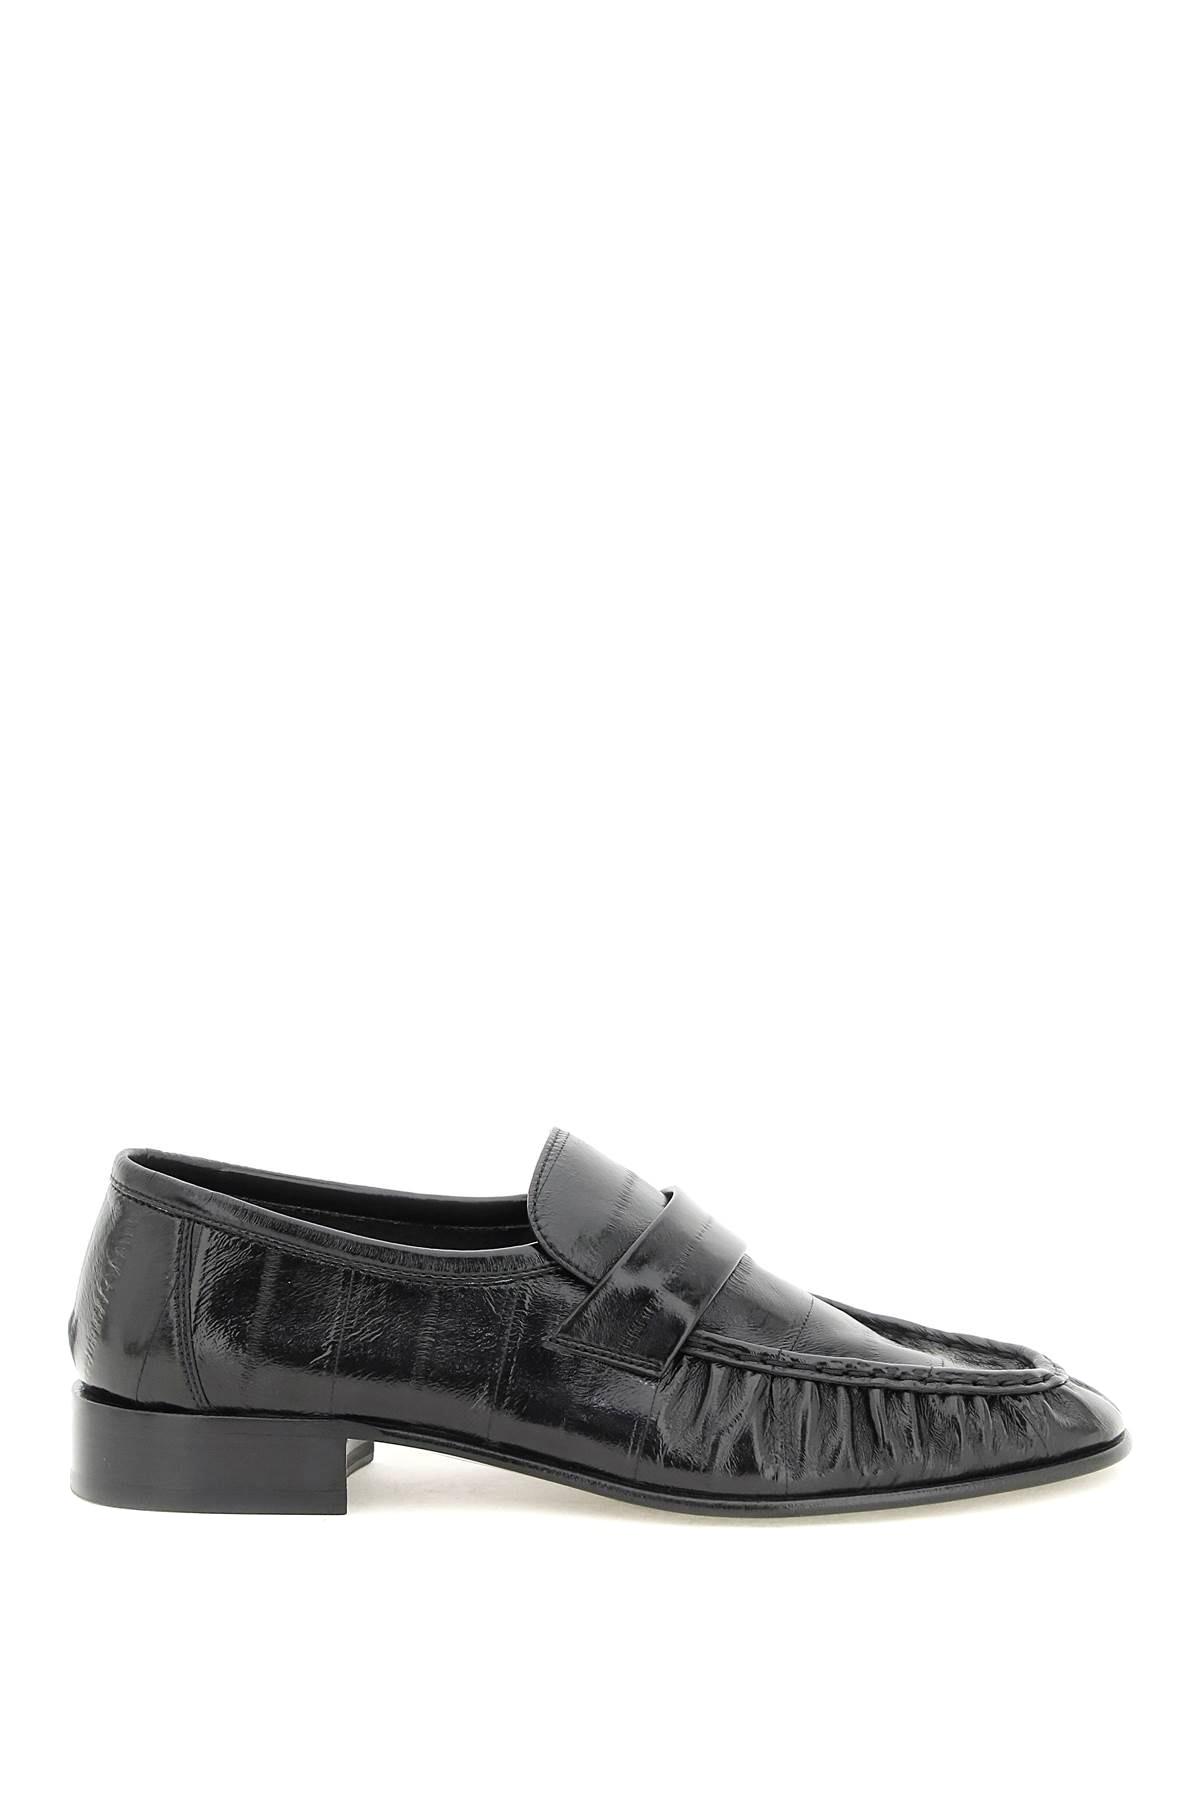 The Row Eel Leather Soft Loafers in Black | Lyst